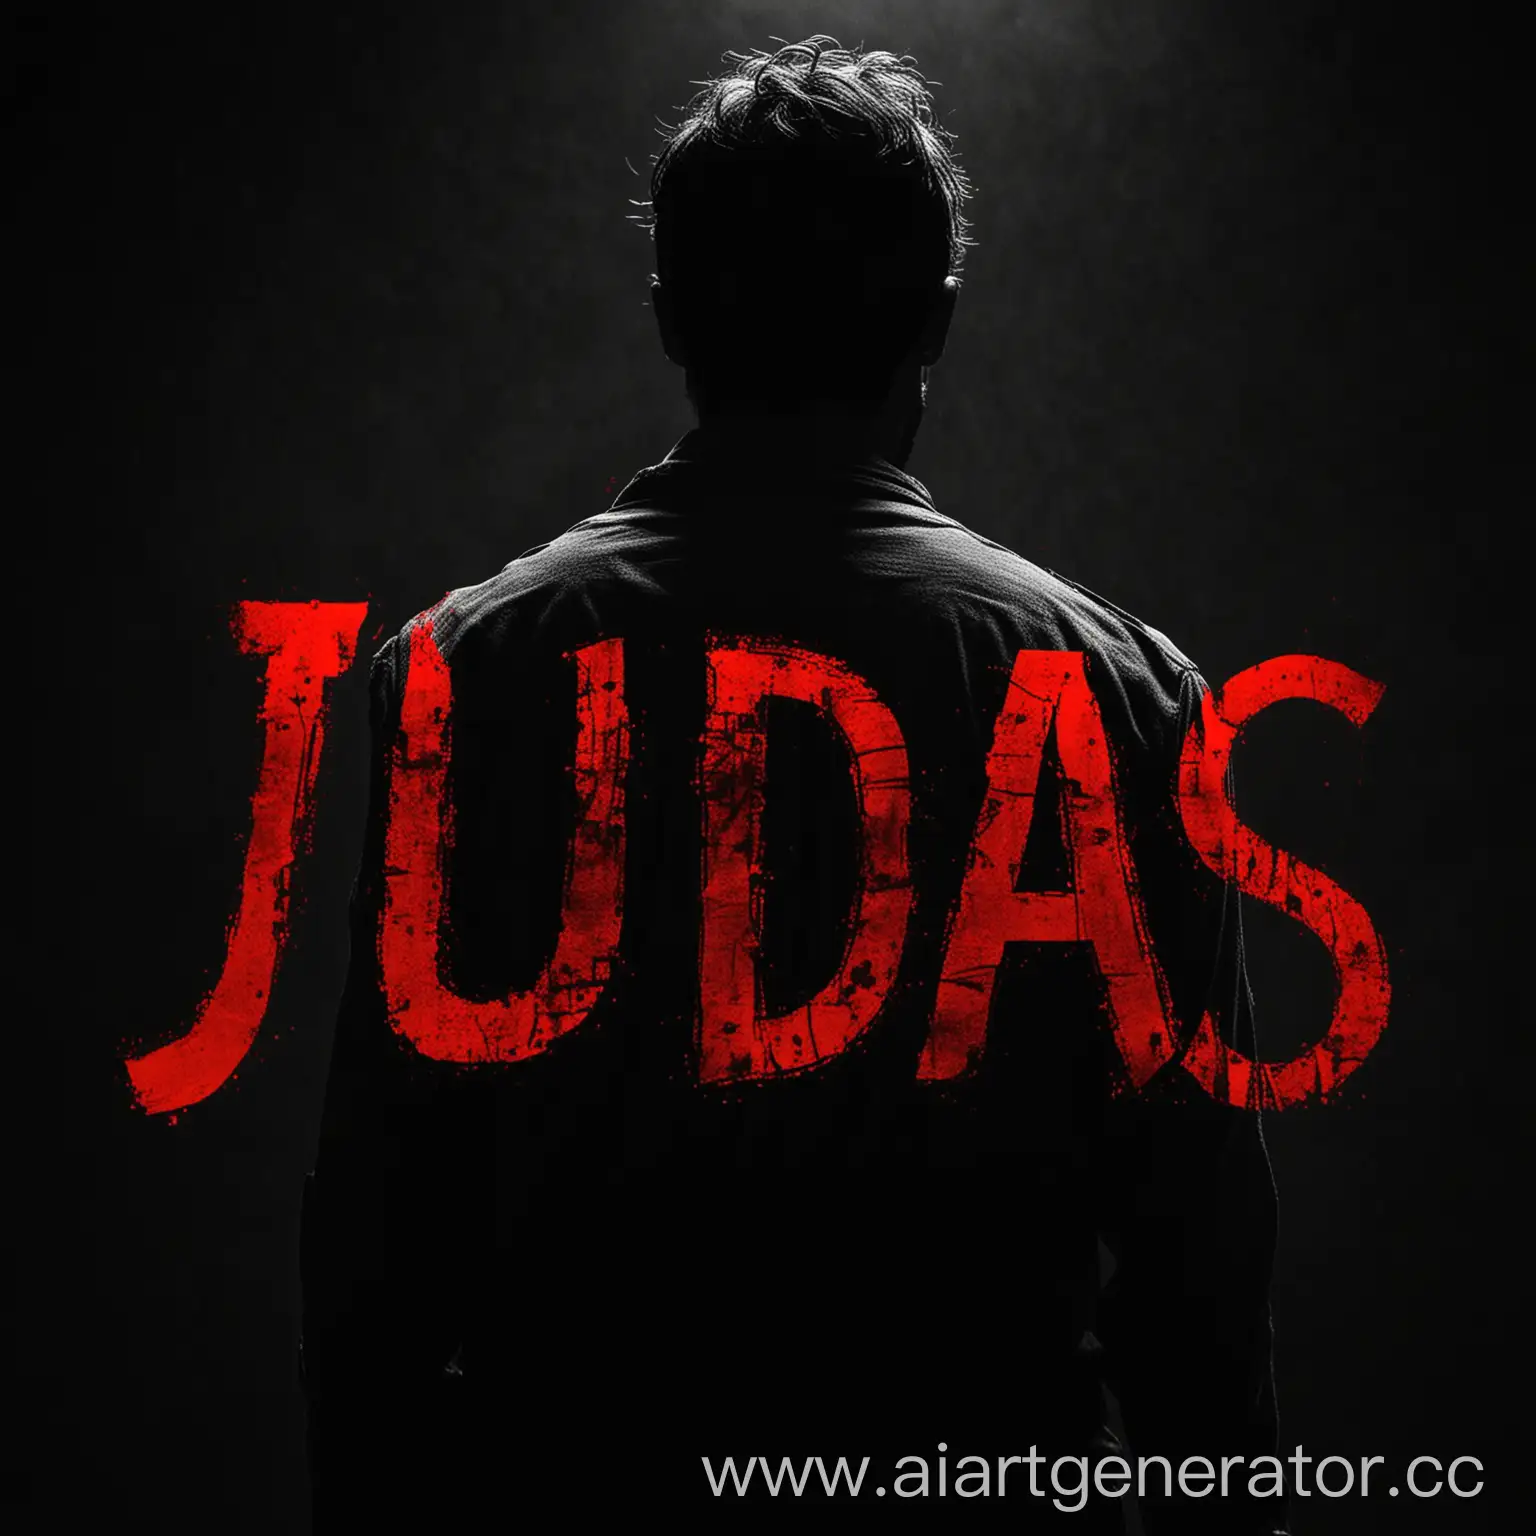 Silhouette-of-Man-with-Judas-in-Red-Letters-Dark-Ambient-Style